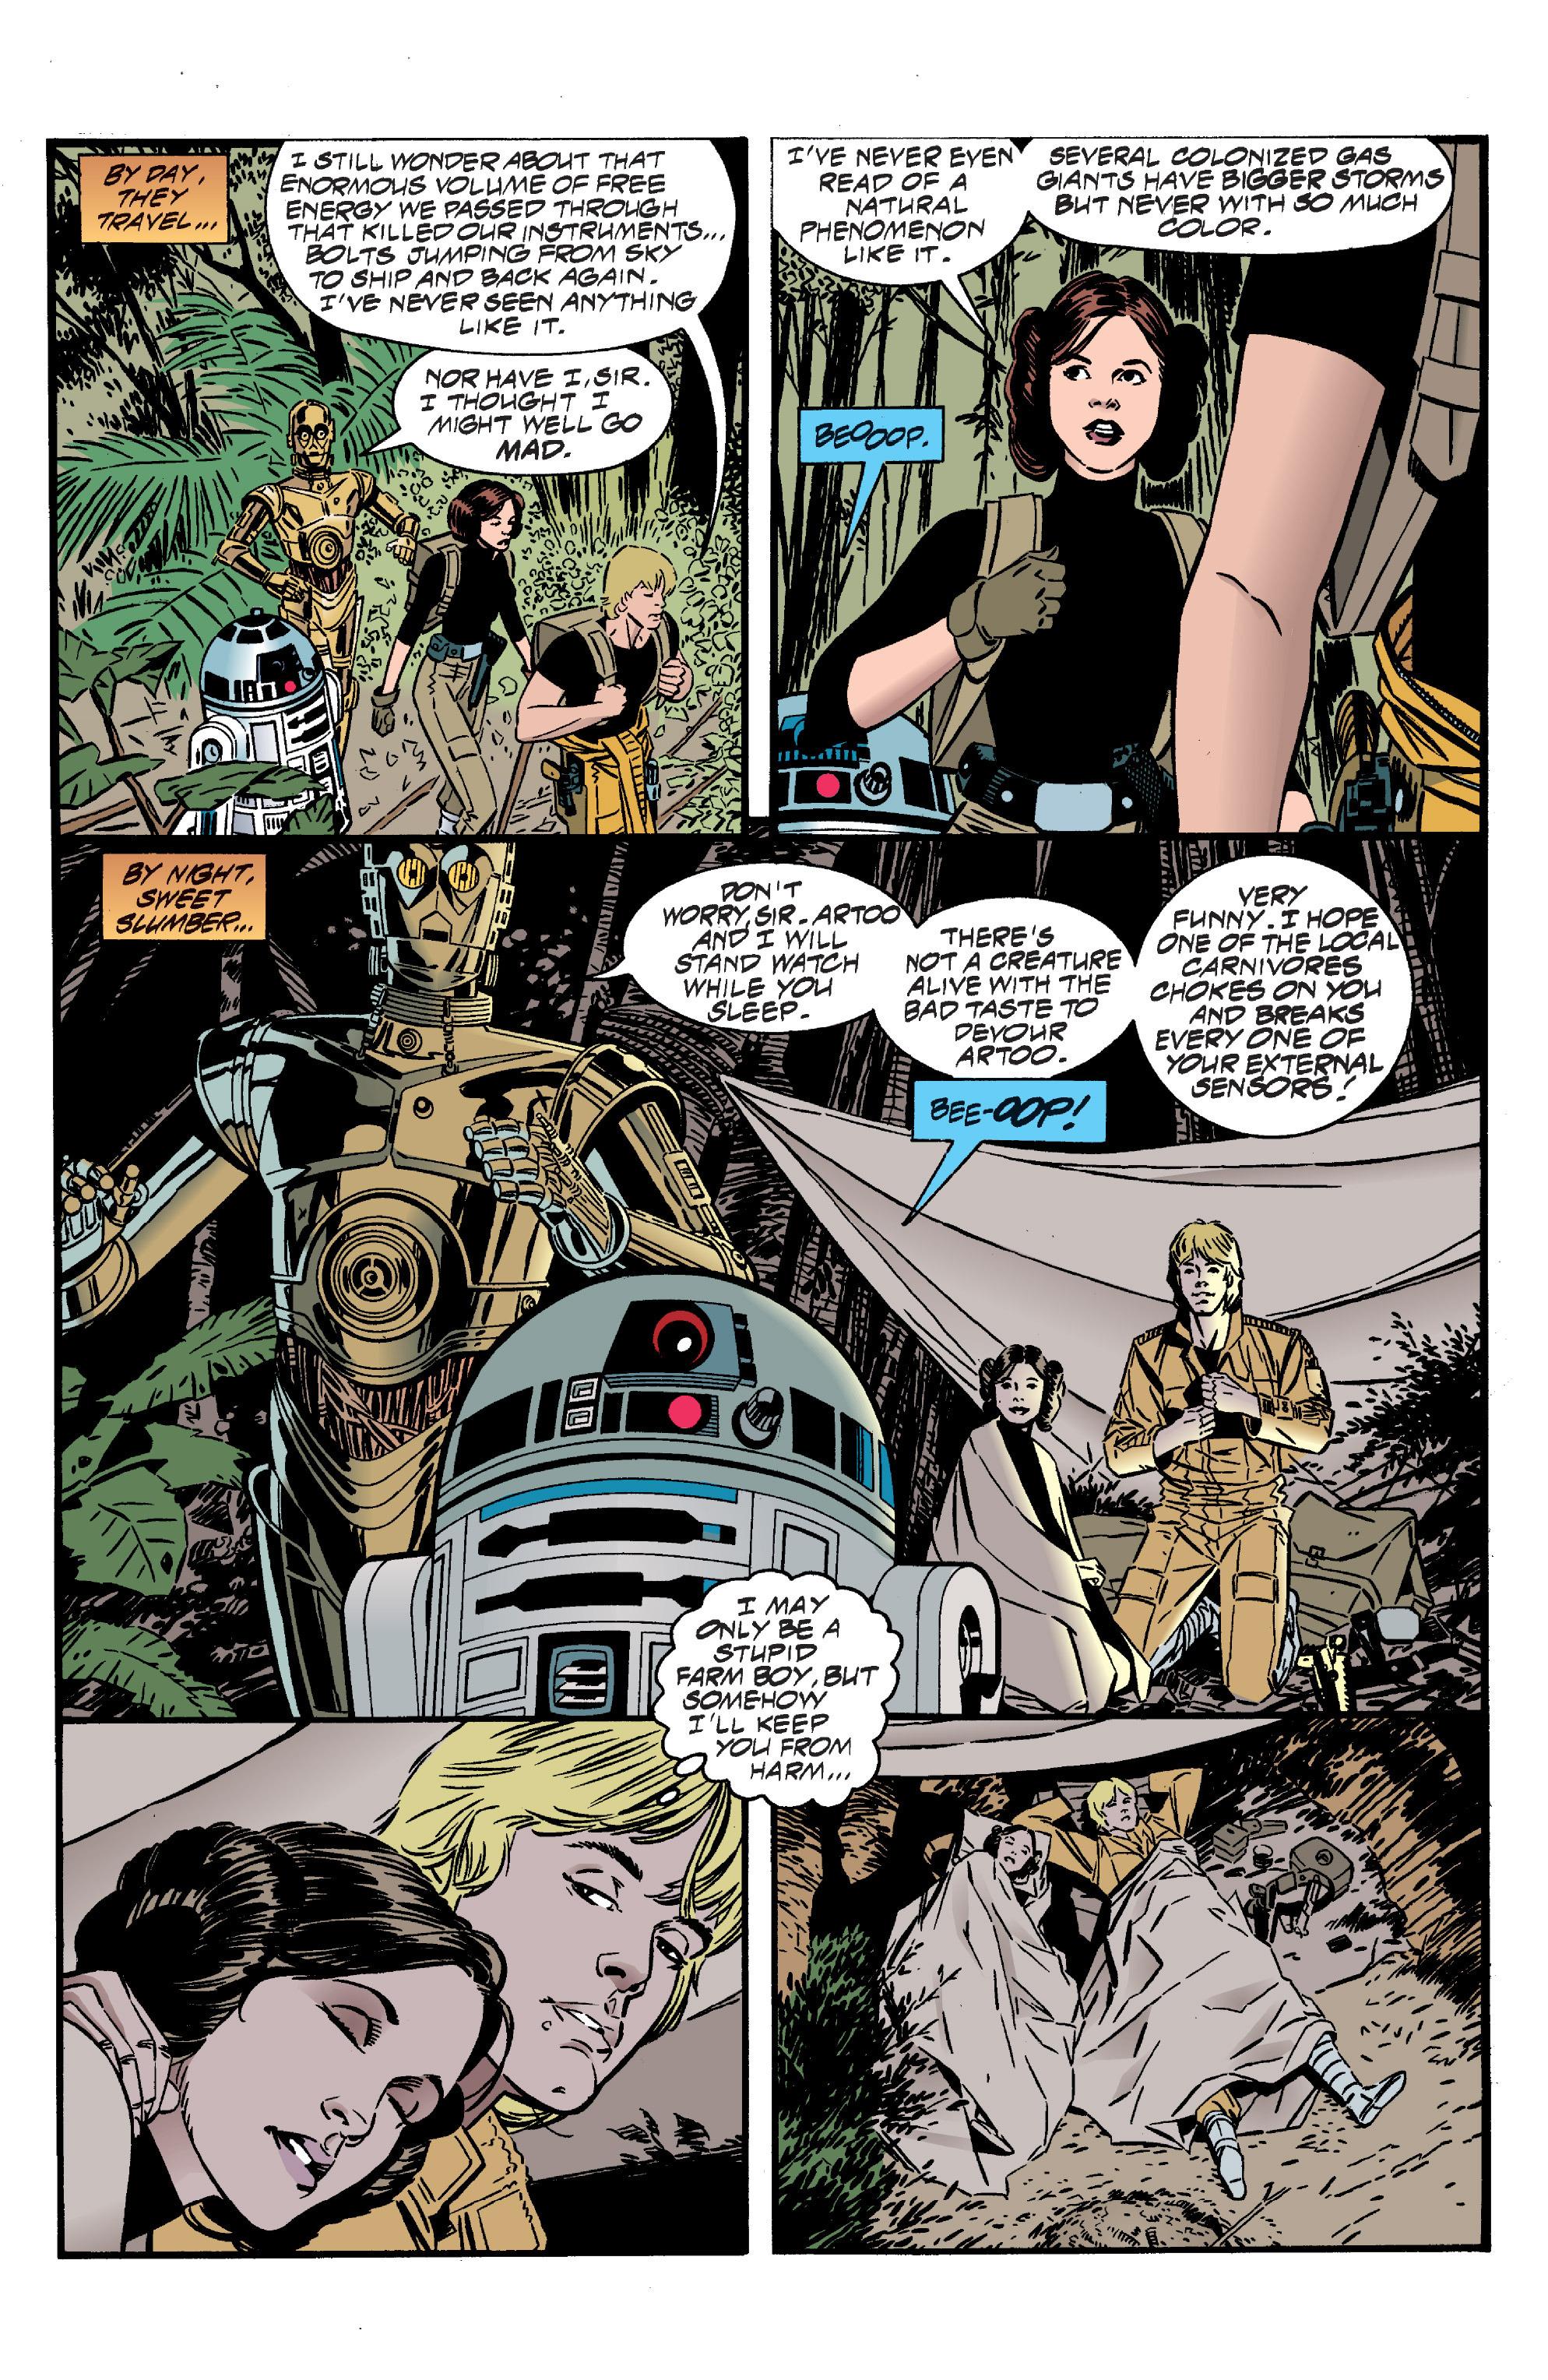 Star Wars Splinter of the Mind's Eye graphic novel review